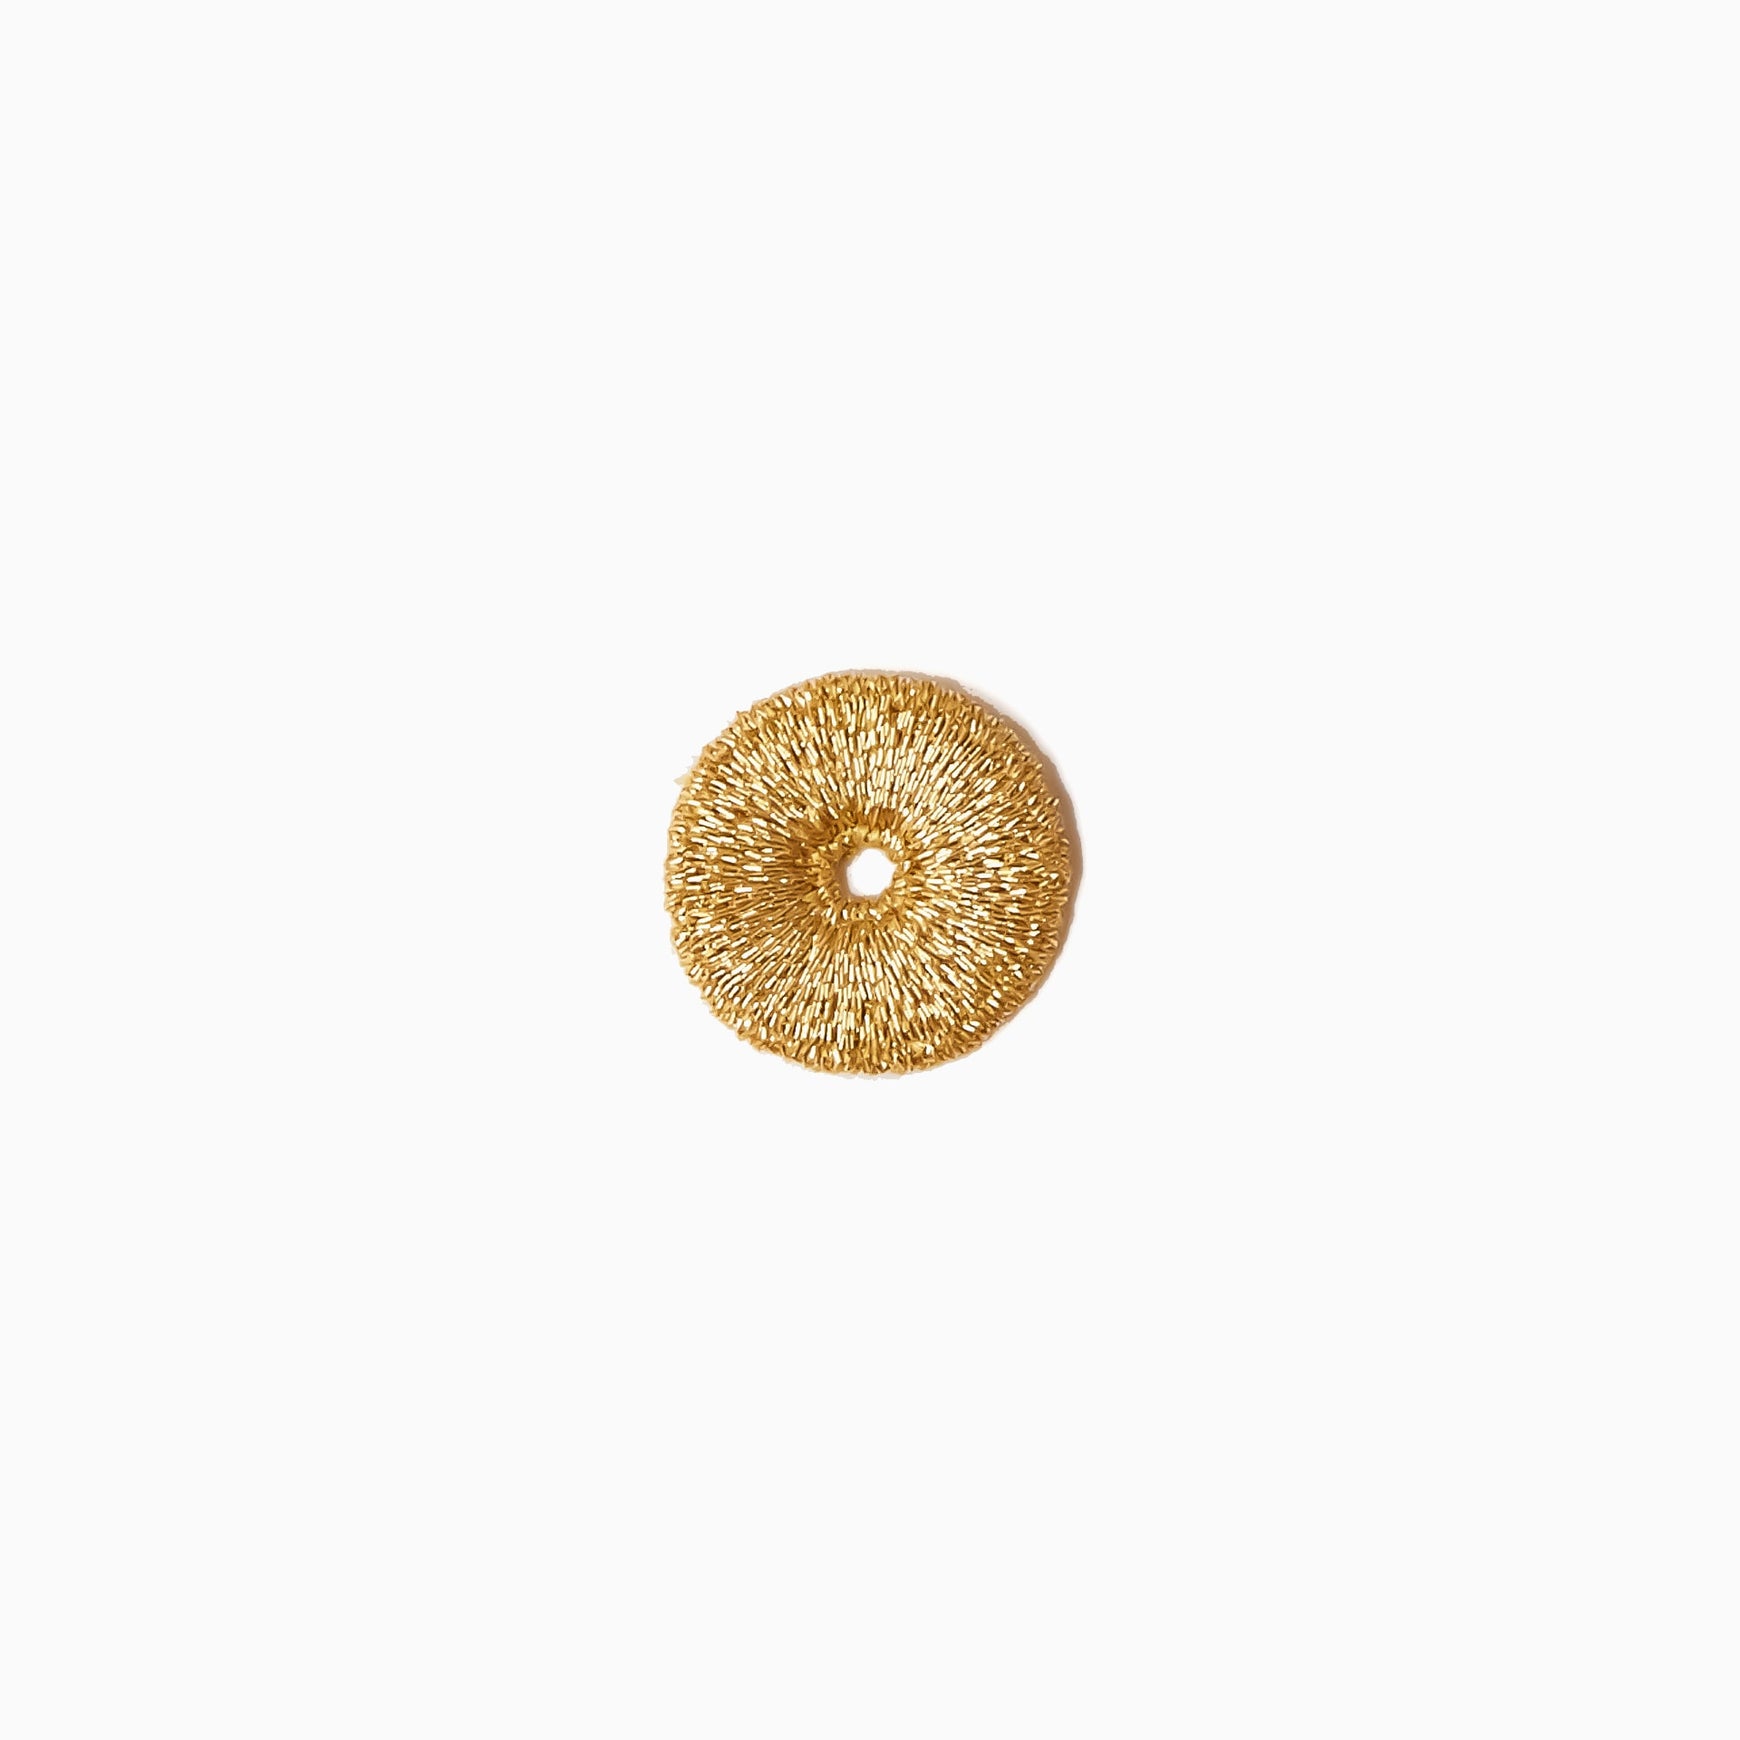 TYPE-1 Circle Washer 10 Pieces (Gold)